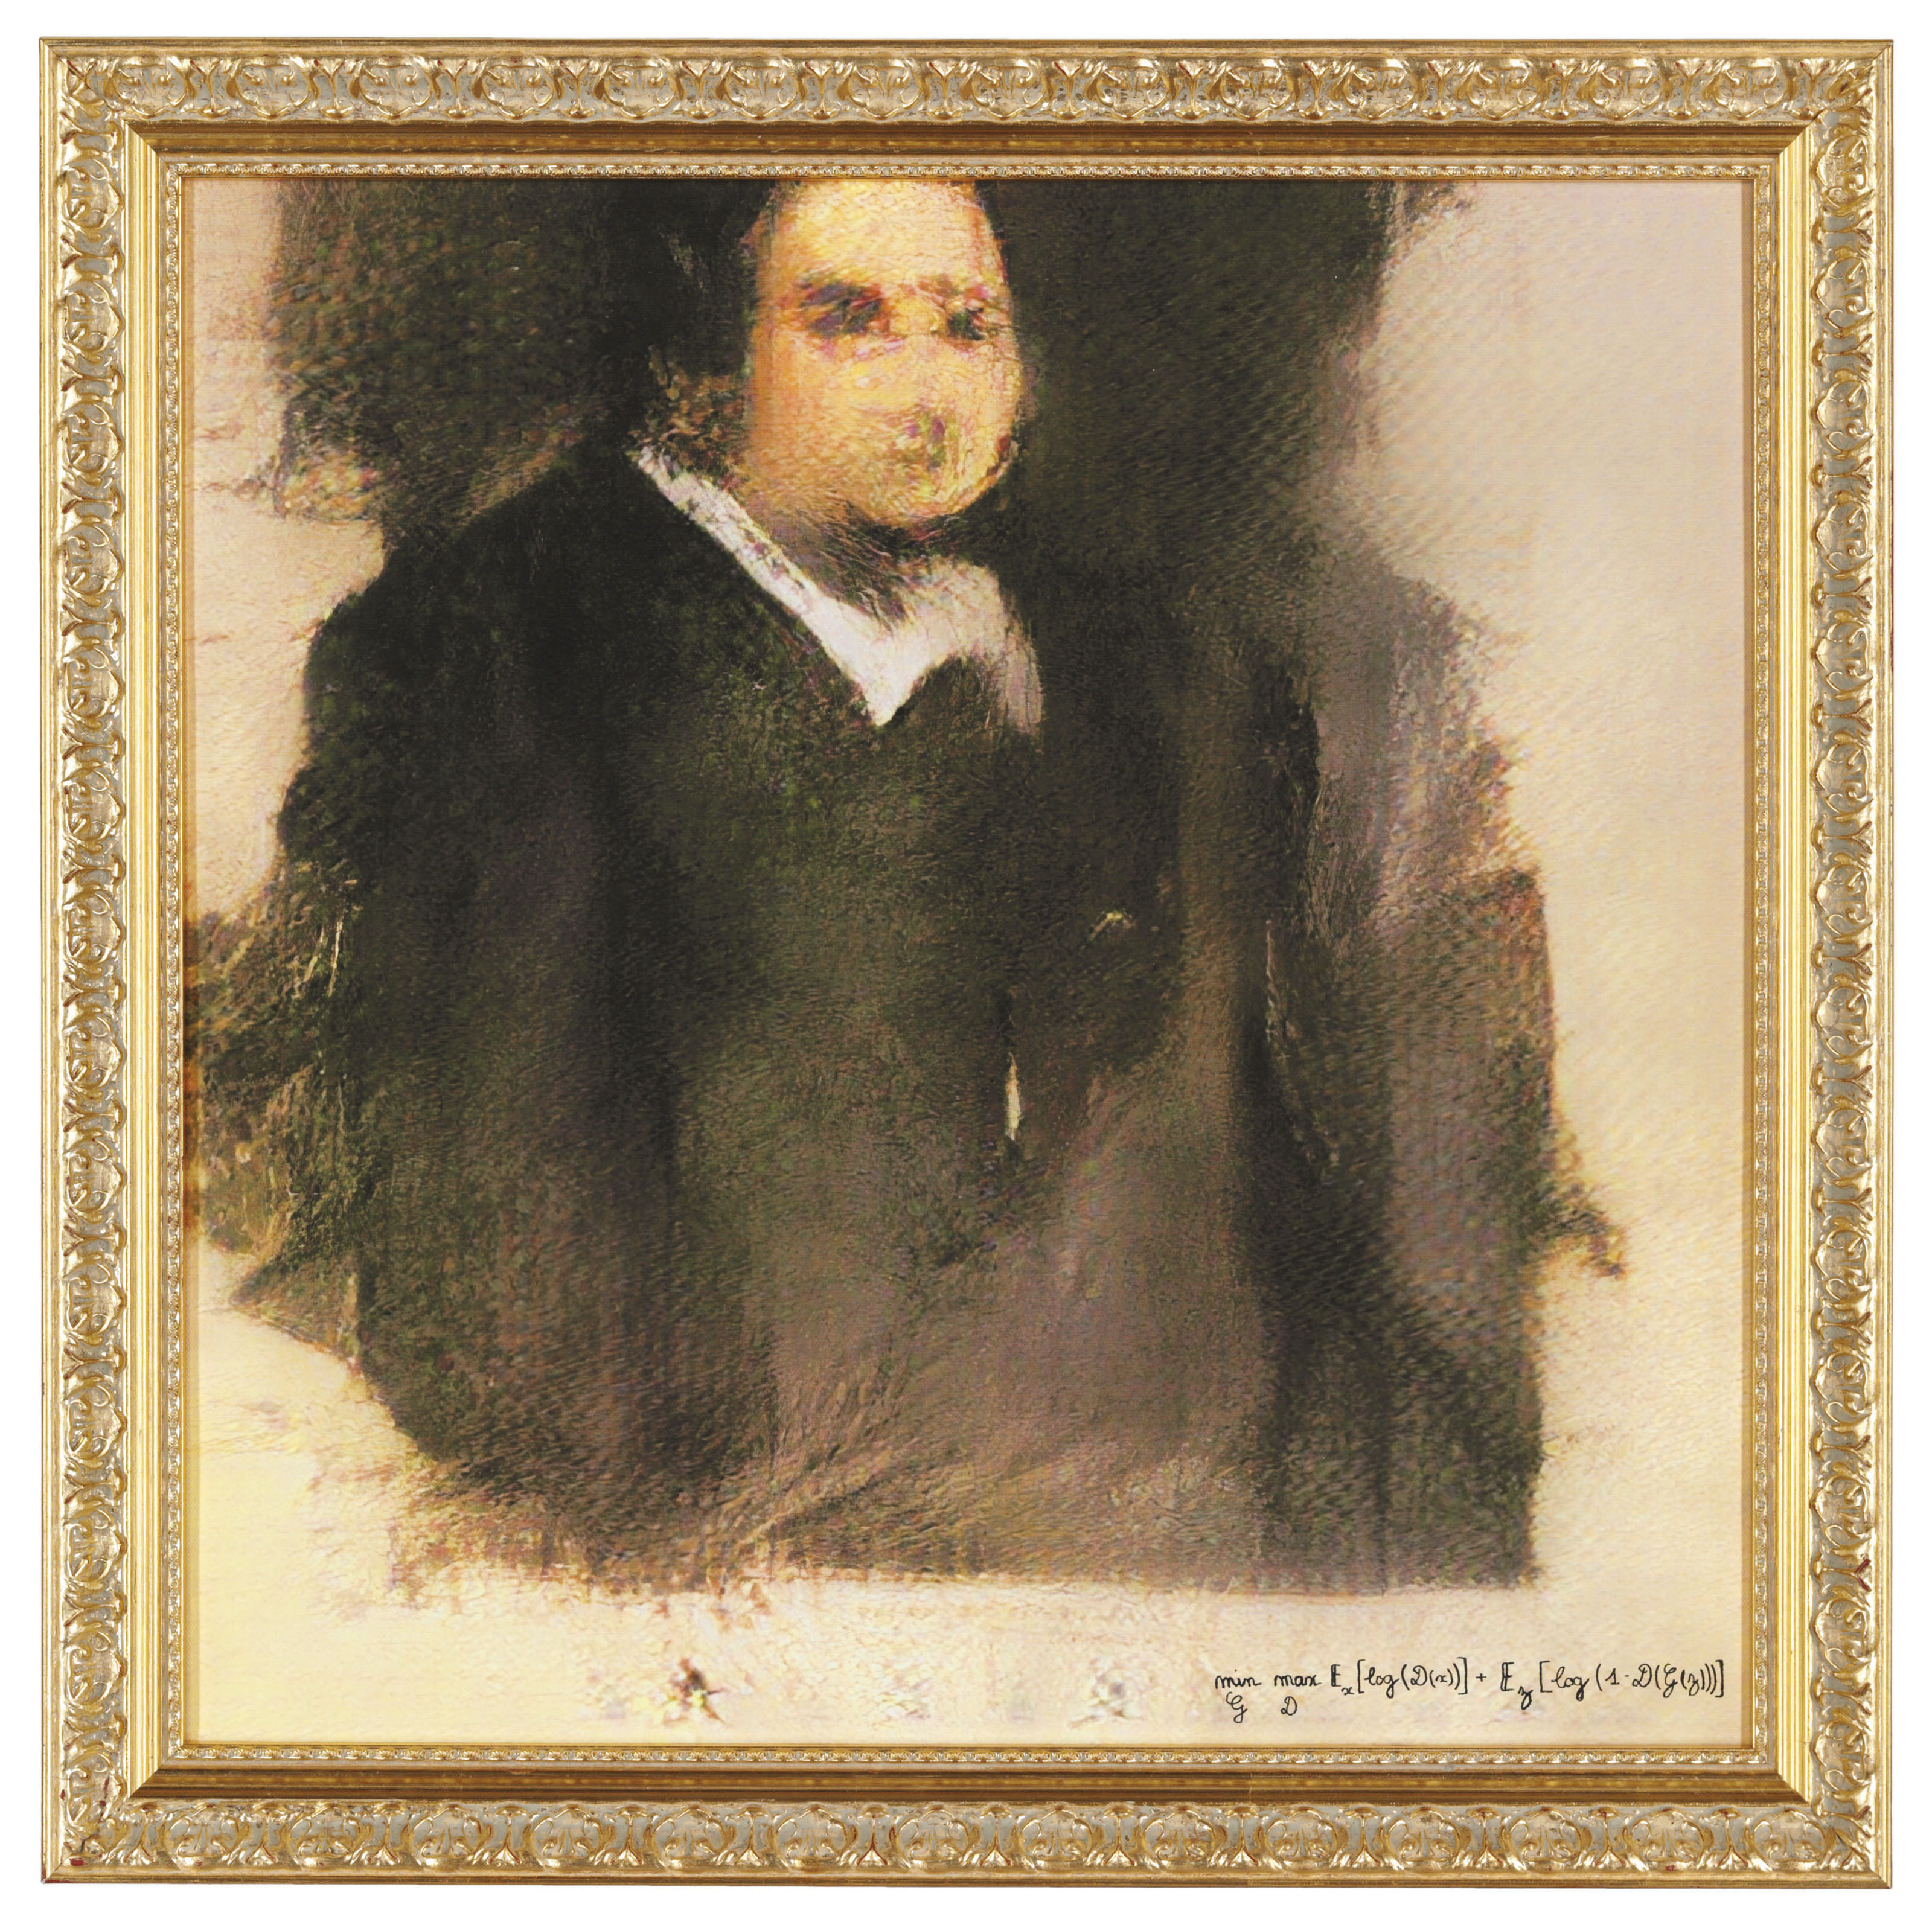 Portrait of Edmond Belamy, 2018, created by GAN (Generative Adversarial Network). Sold for $432,500 on 25 October at Christie’s in New York. Image © Obvious